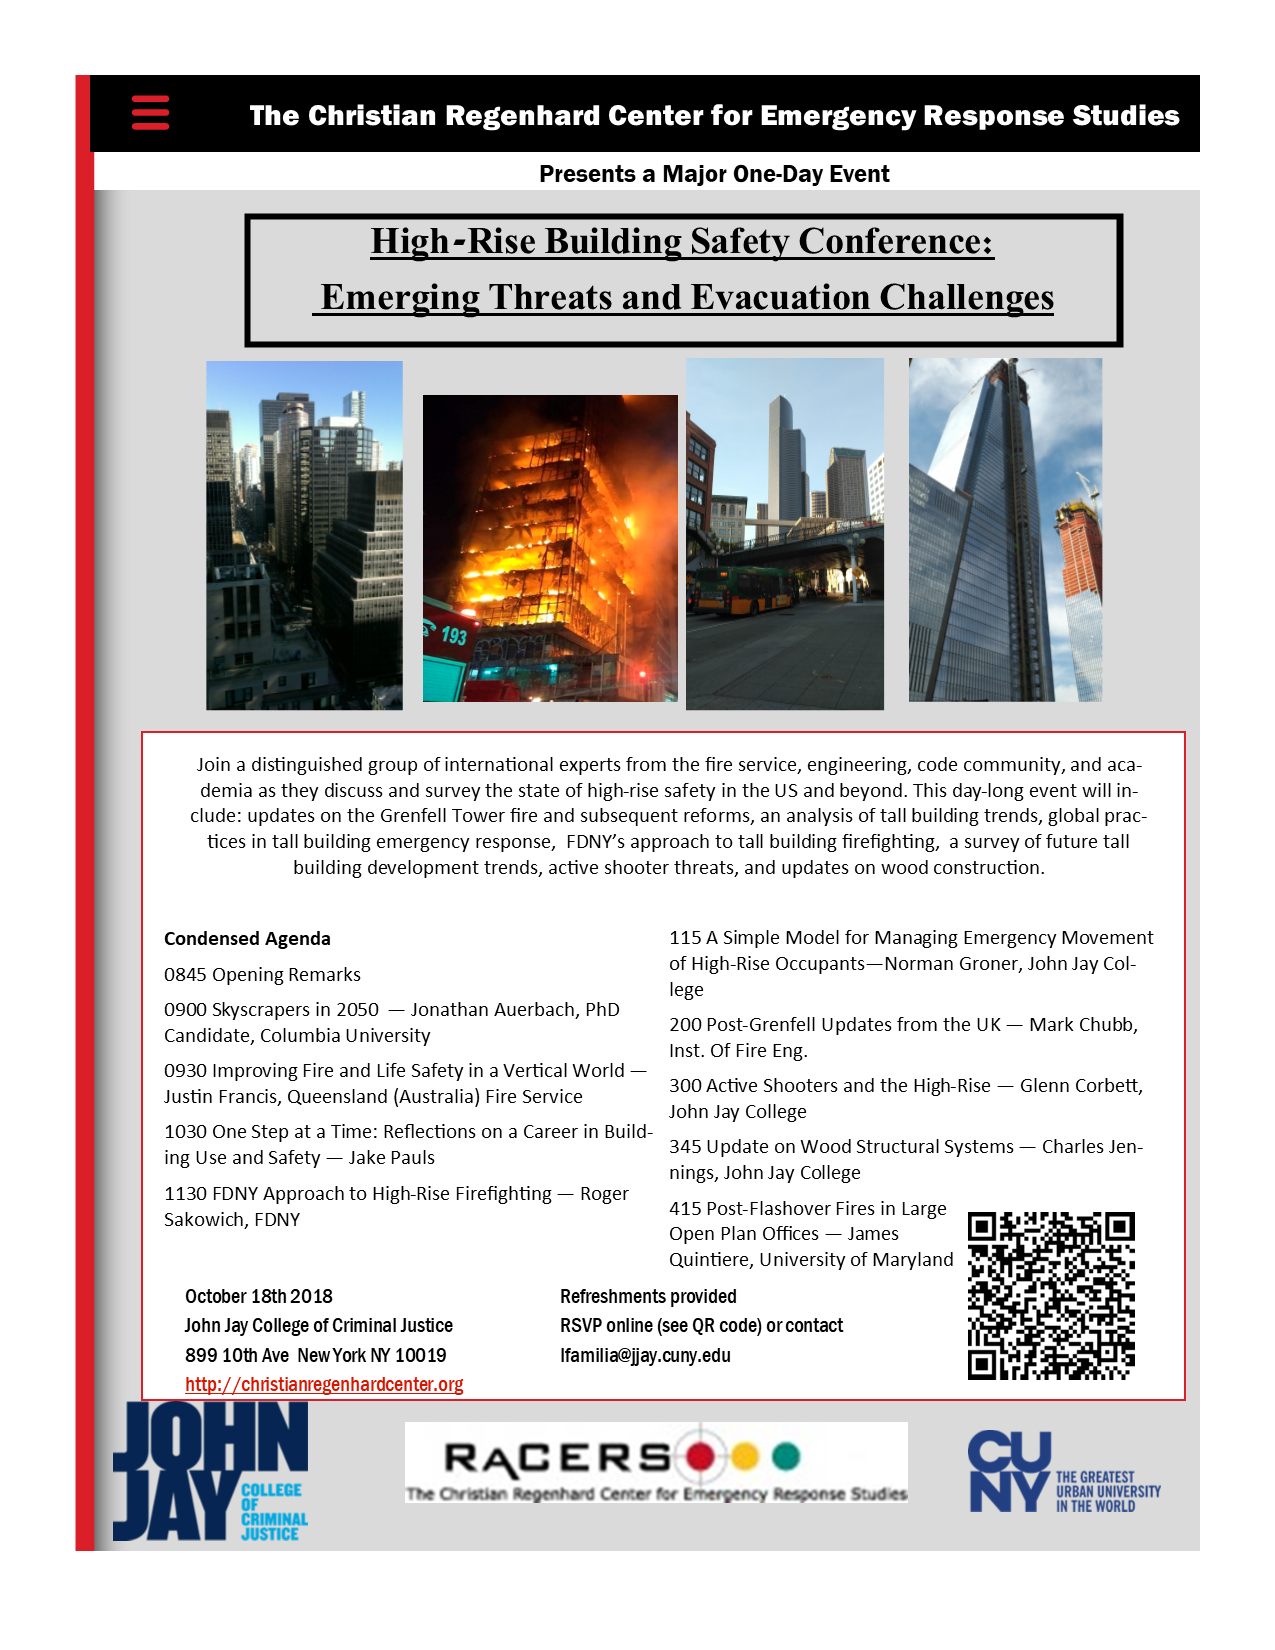 FInal Program Announced for October 18 High-Rise Conference